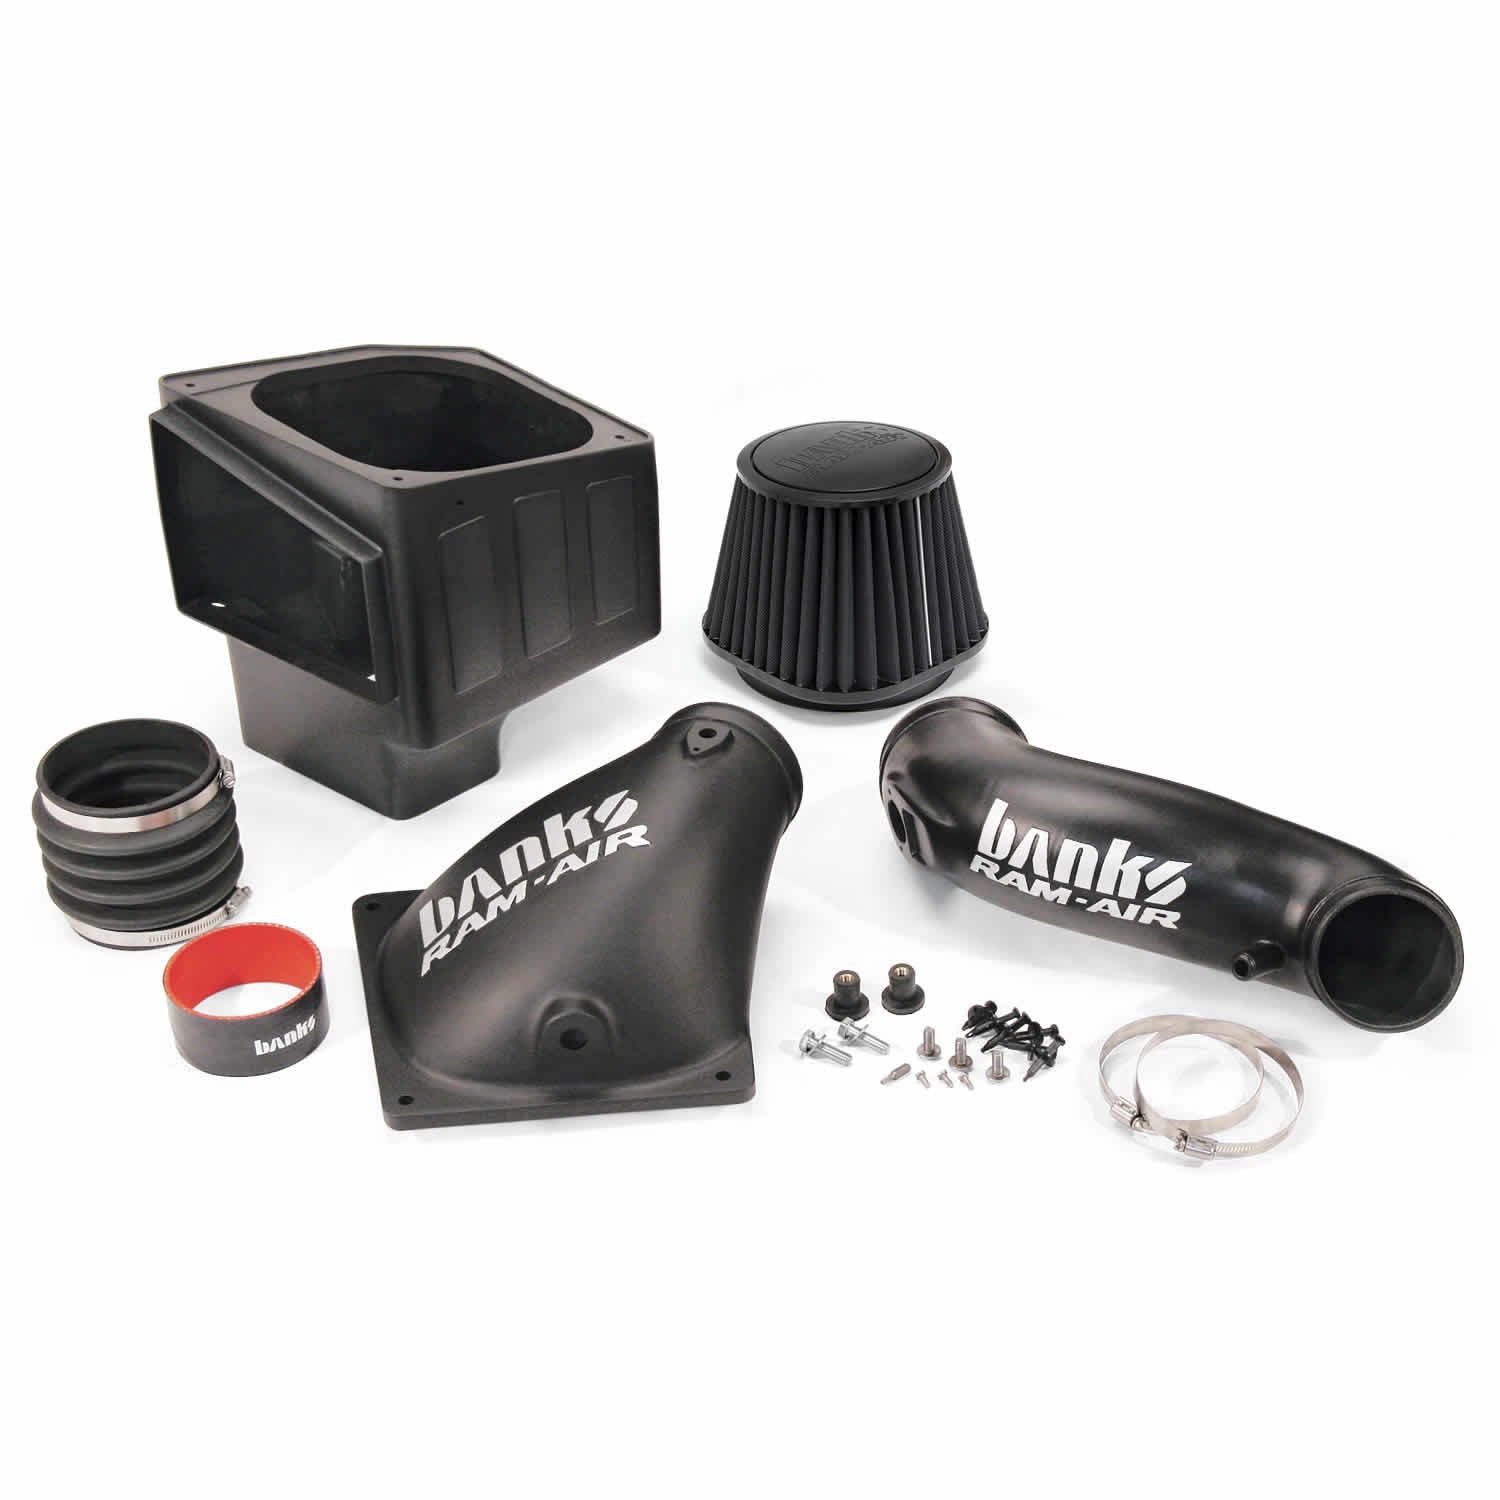 Components used in the Banks Ram-Air intake for 6.7L Cummins